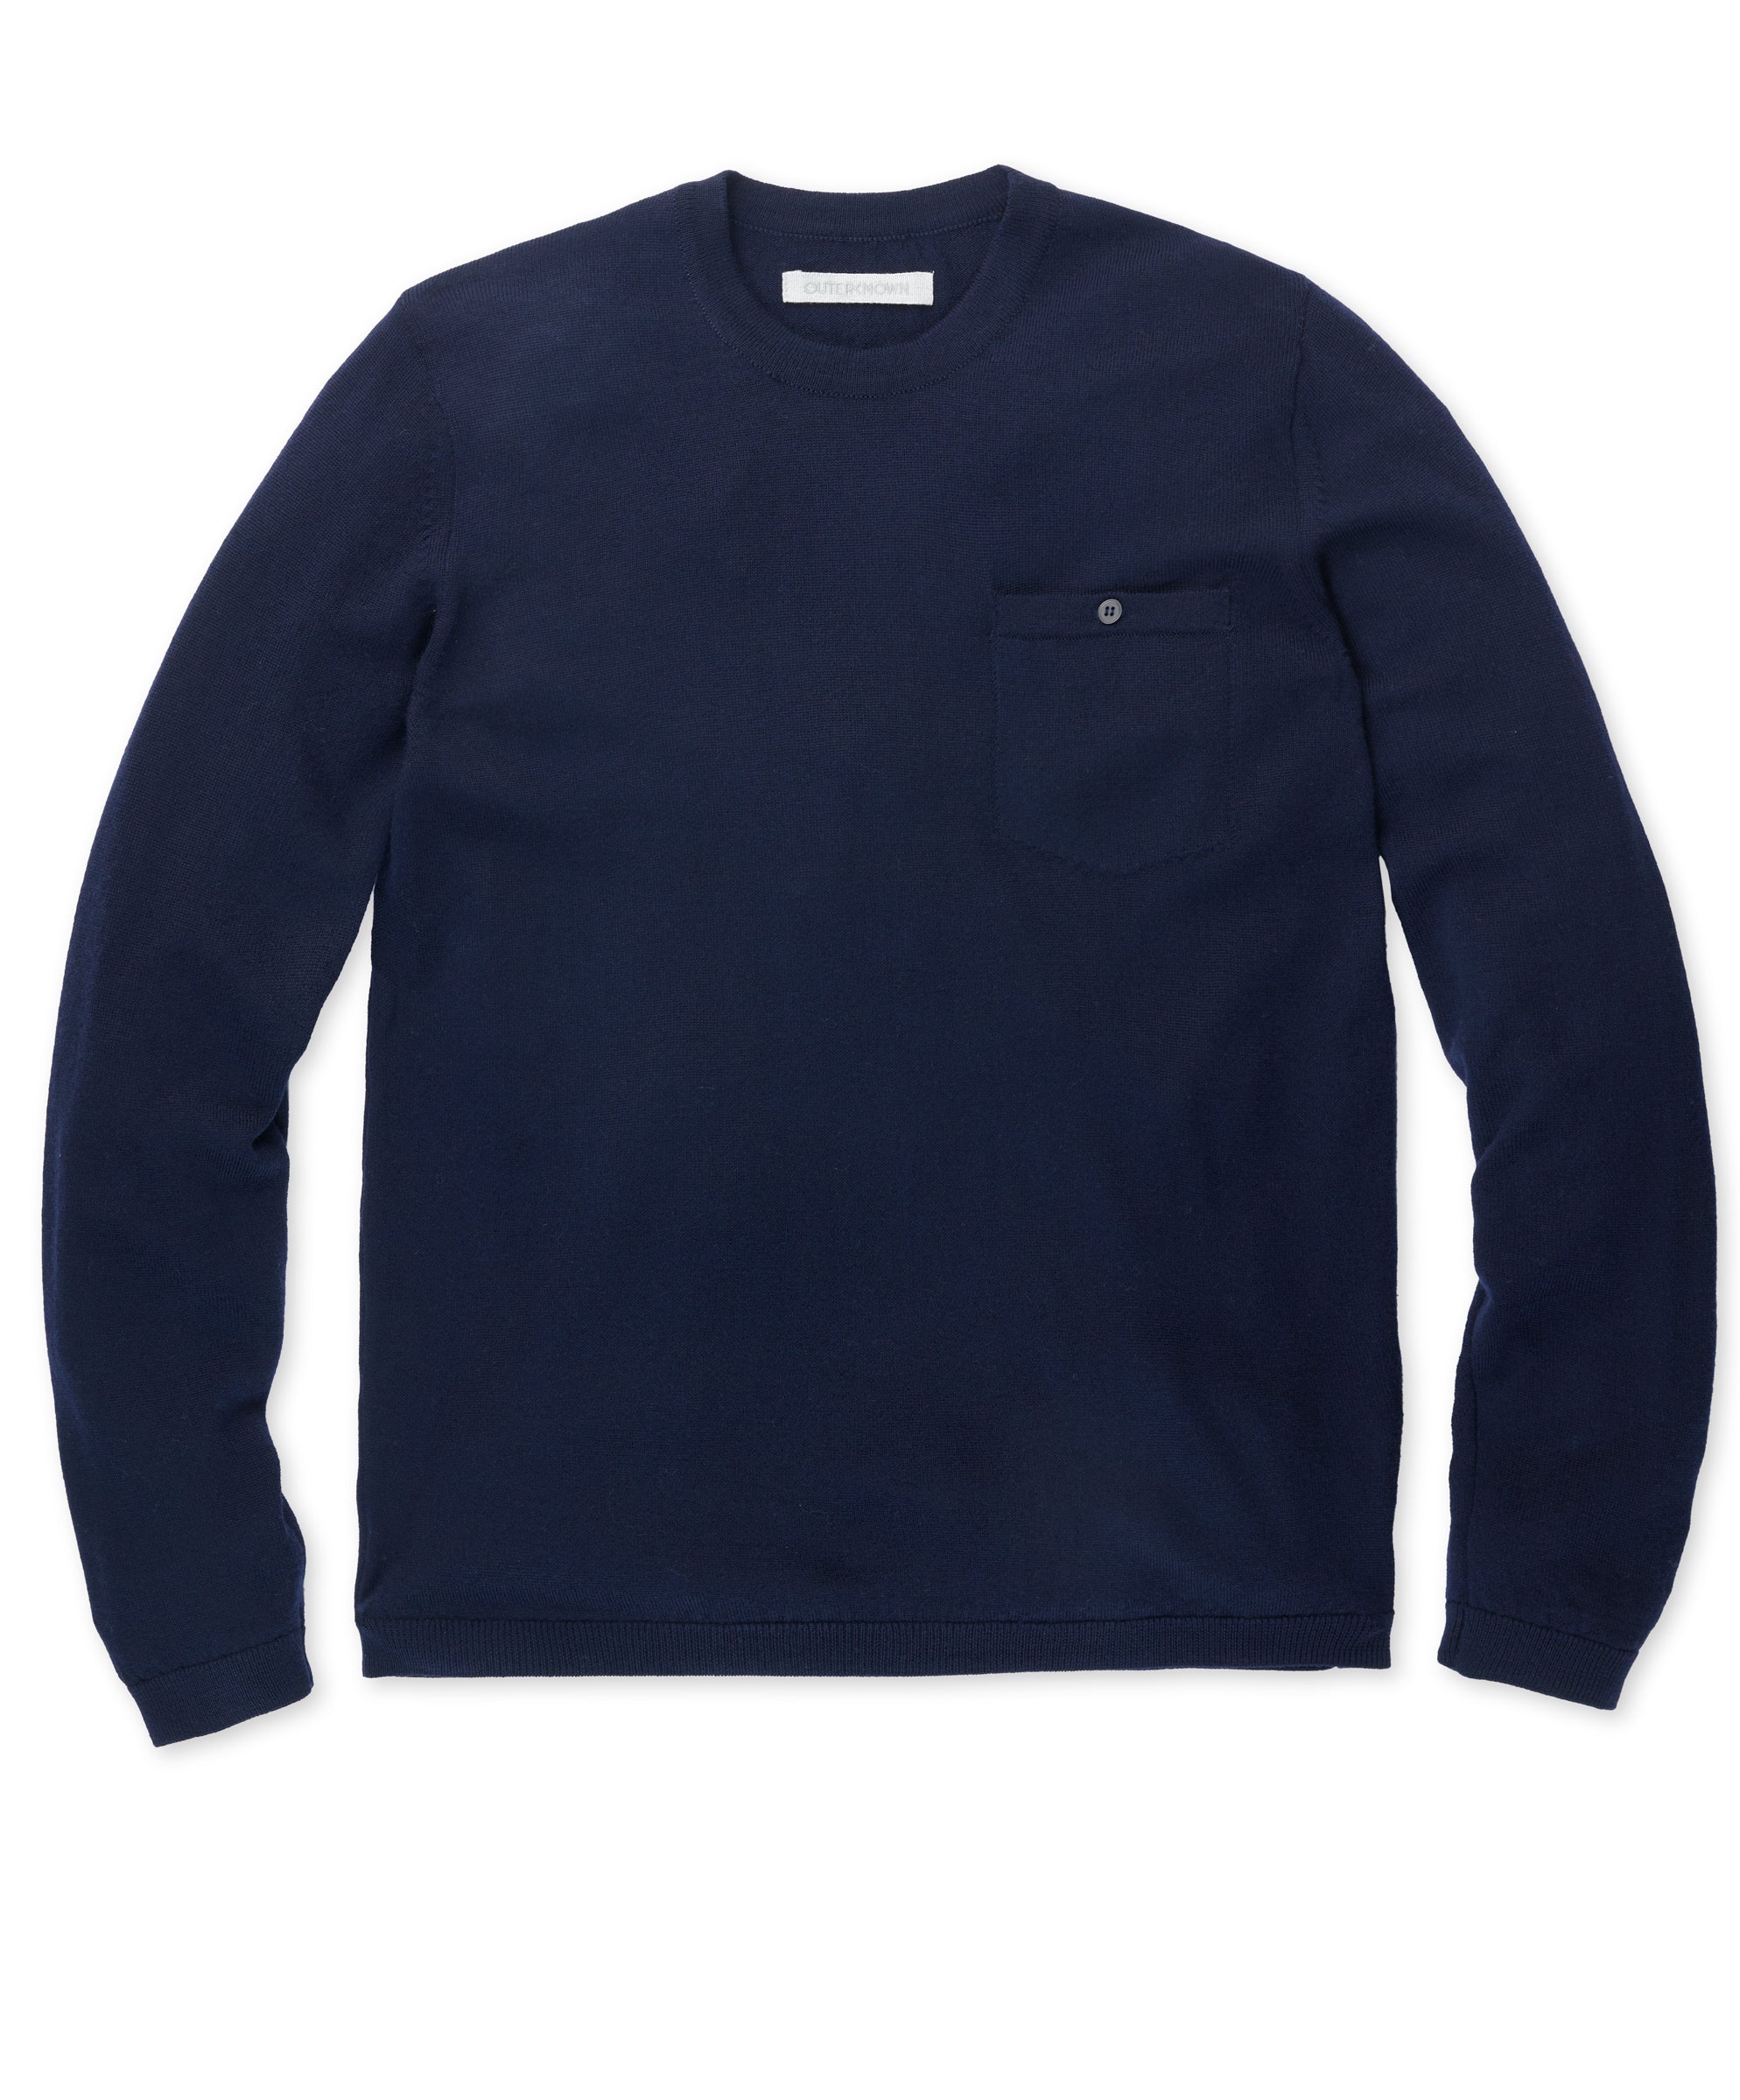 Palisades Pocket Crew | Men's Sweaters | Outerknown